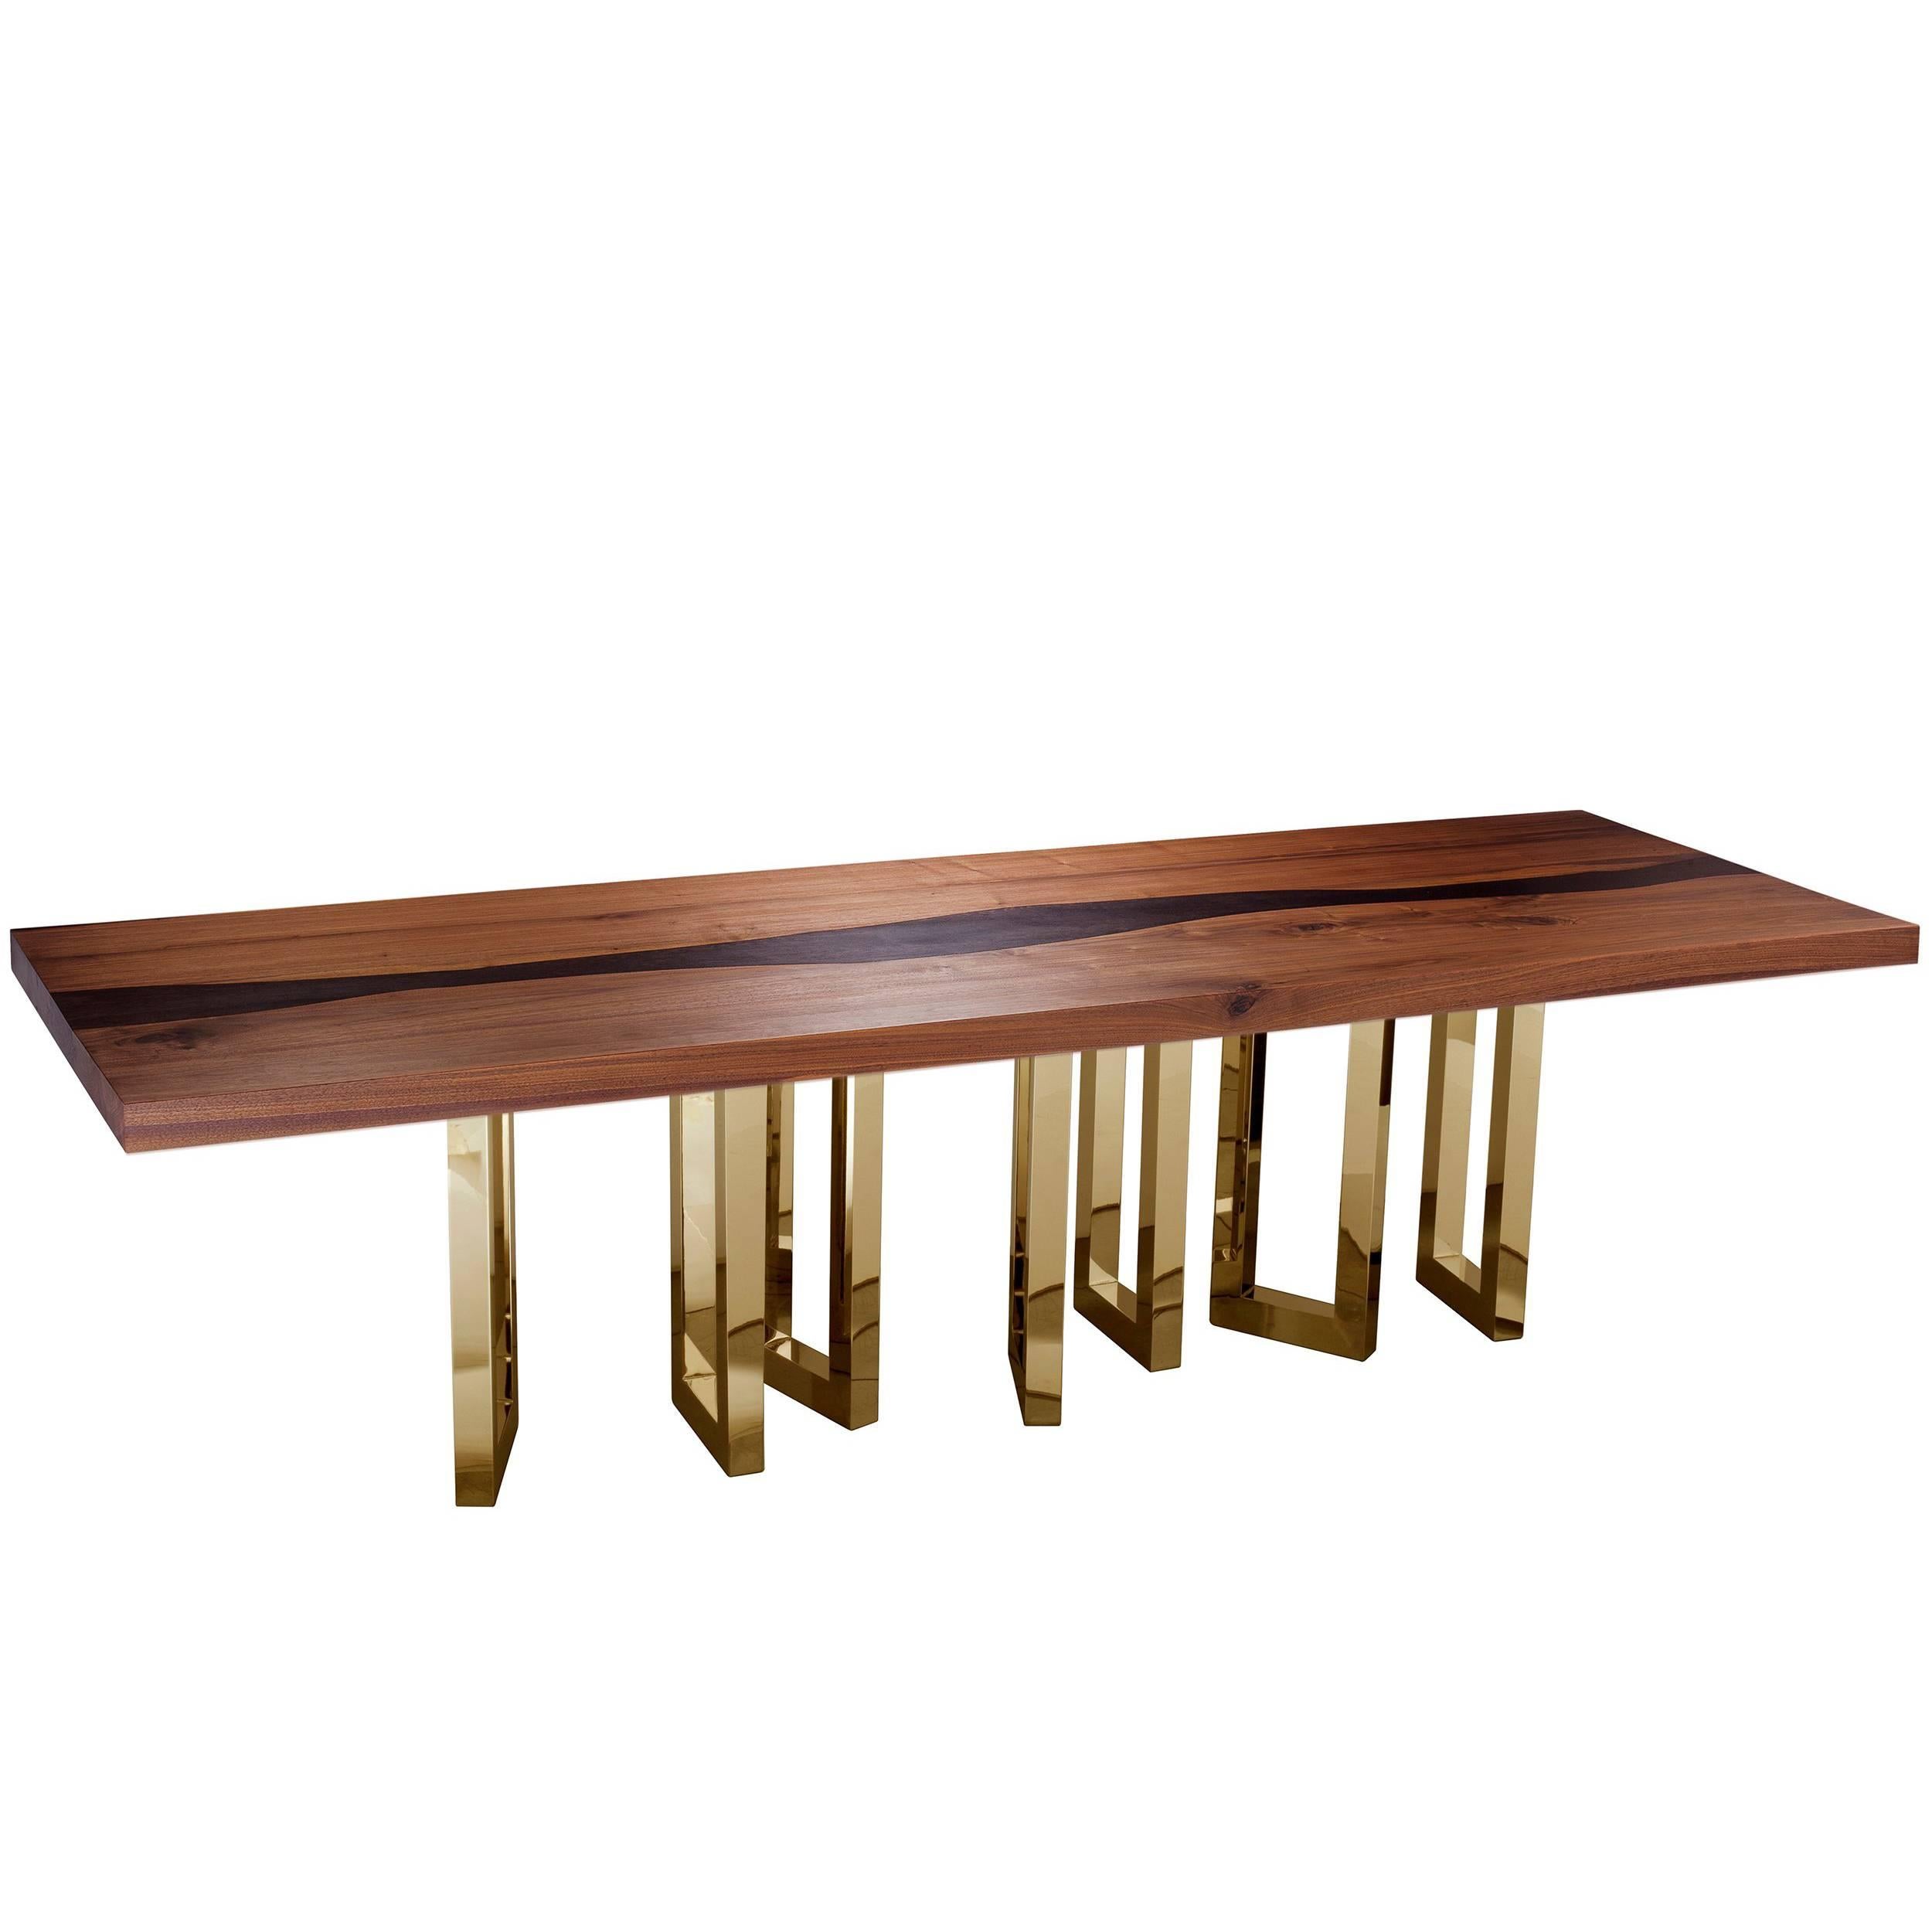 "Il Pezzo 6 Long Table" length 300cm/118” - solid walnut and wenge - brass base For Sale